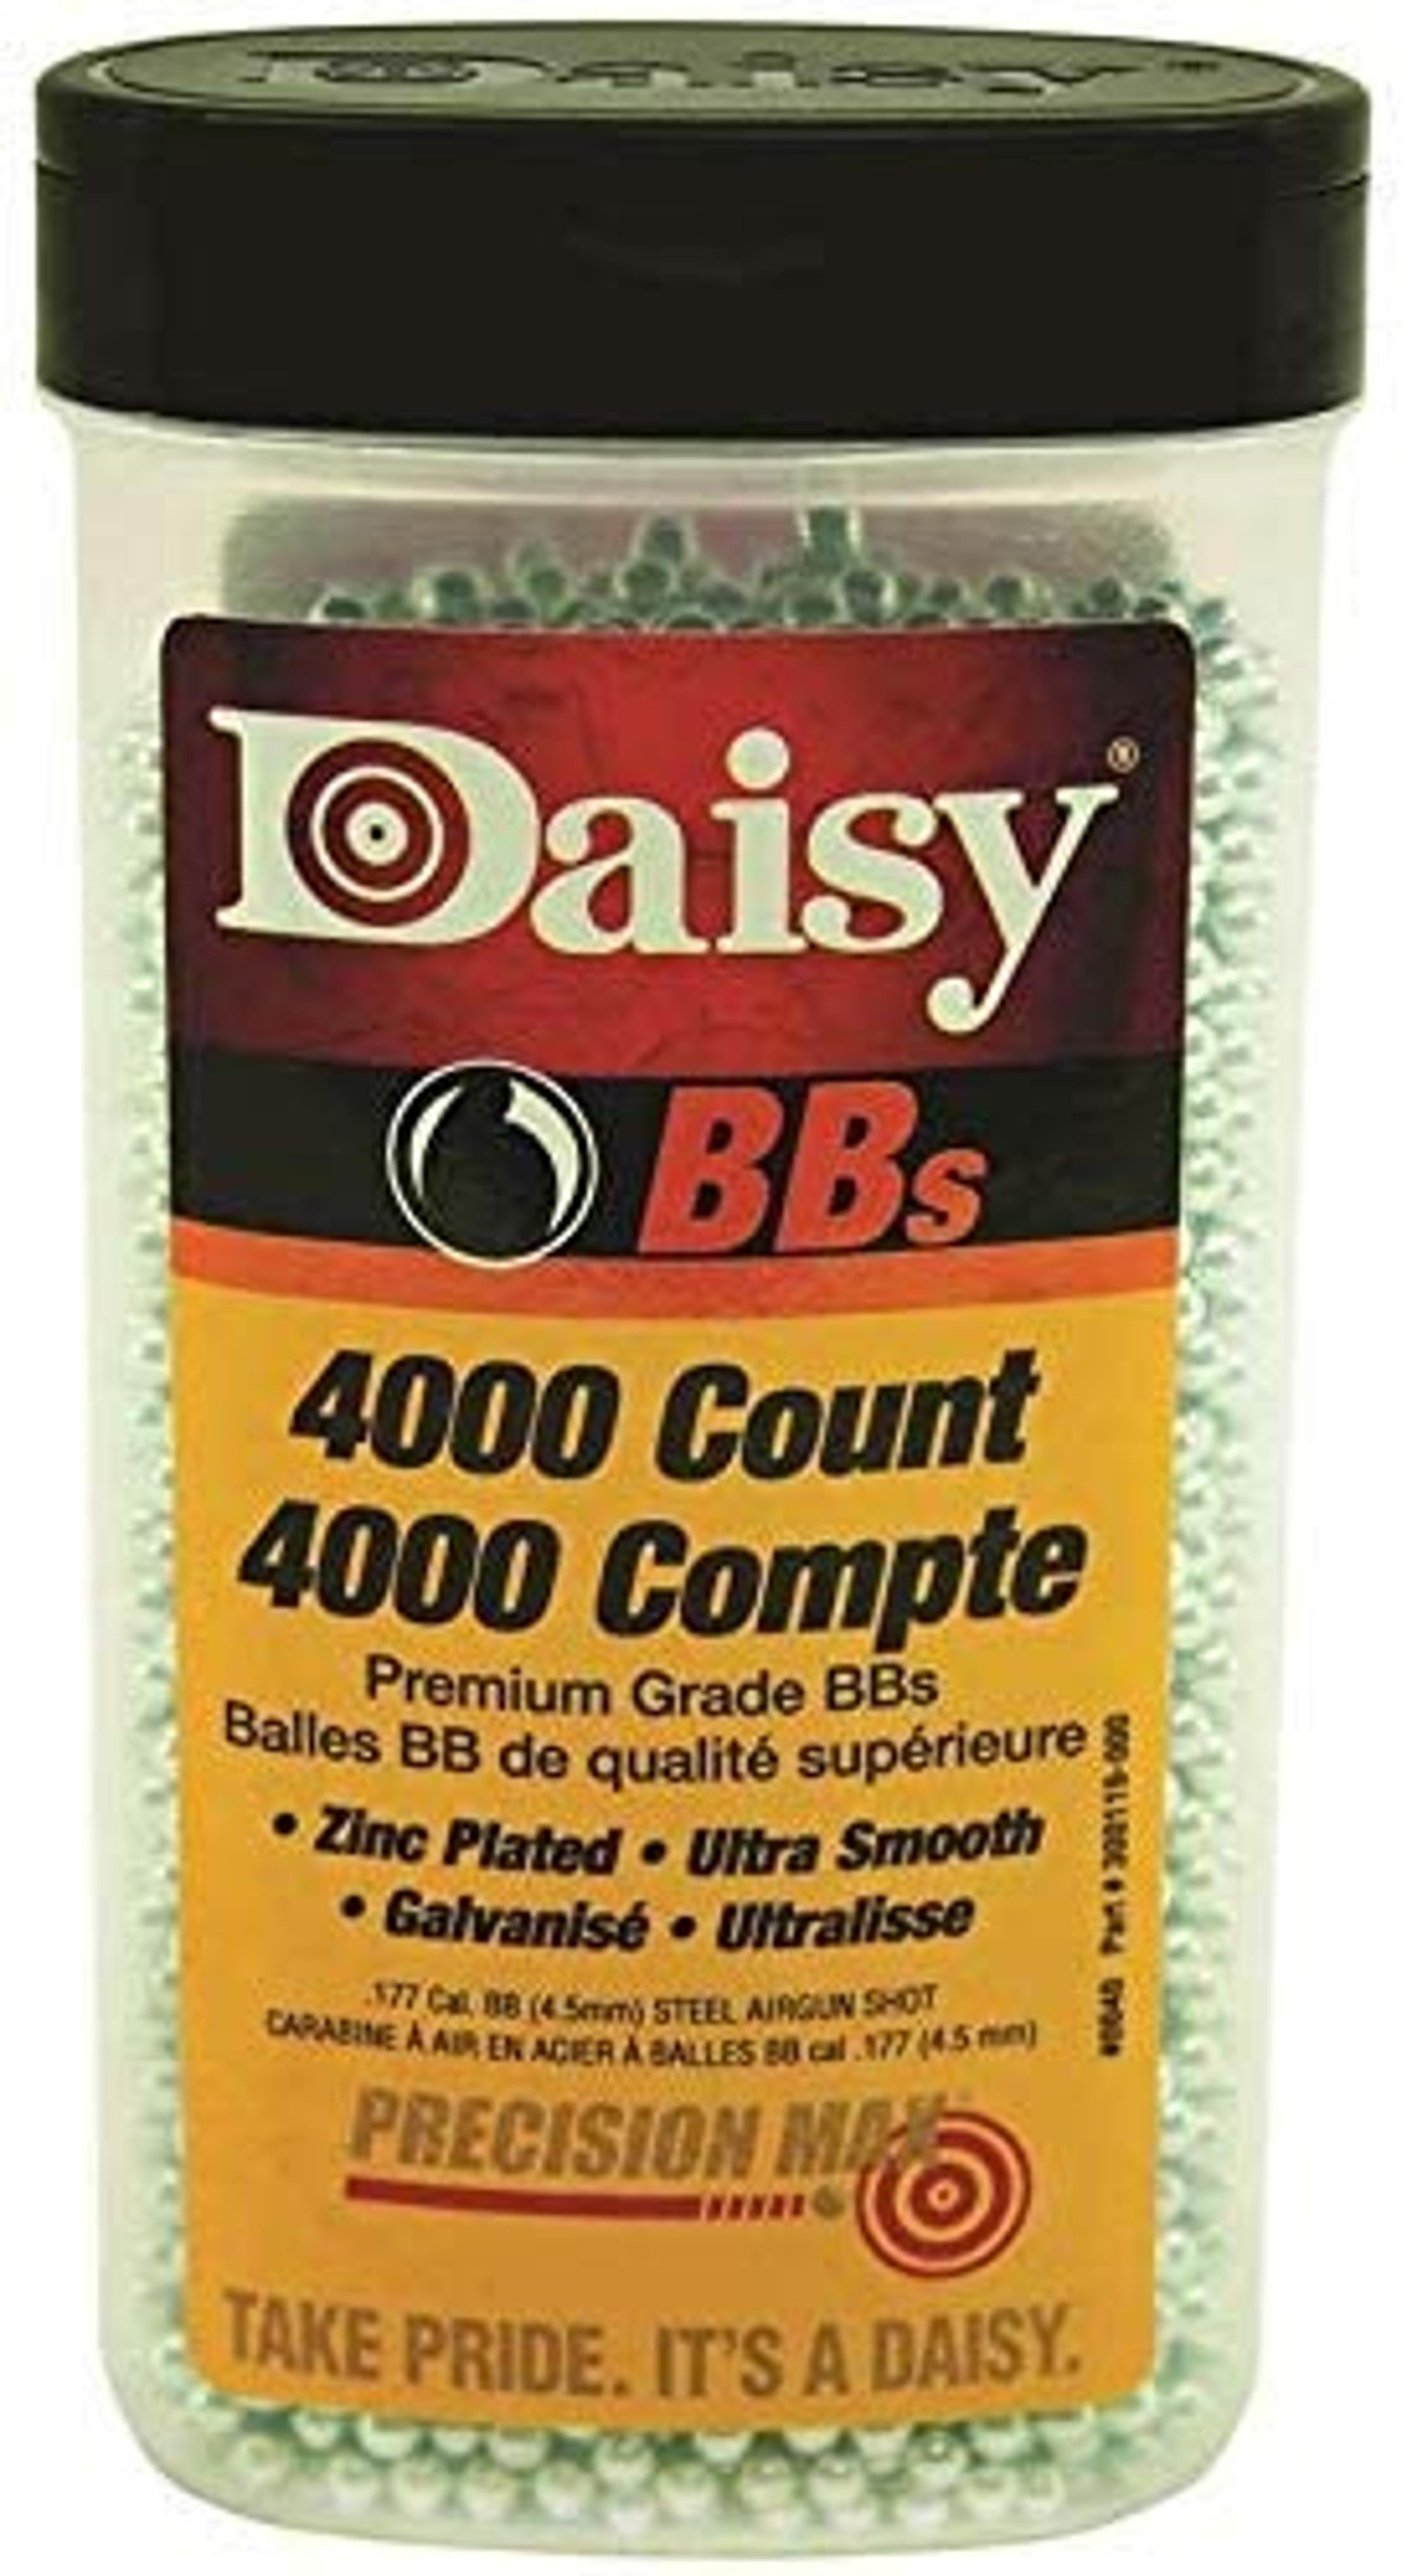  Daisy 4000 Count Zincplated Bb